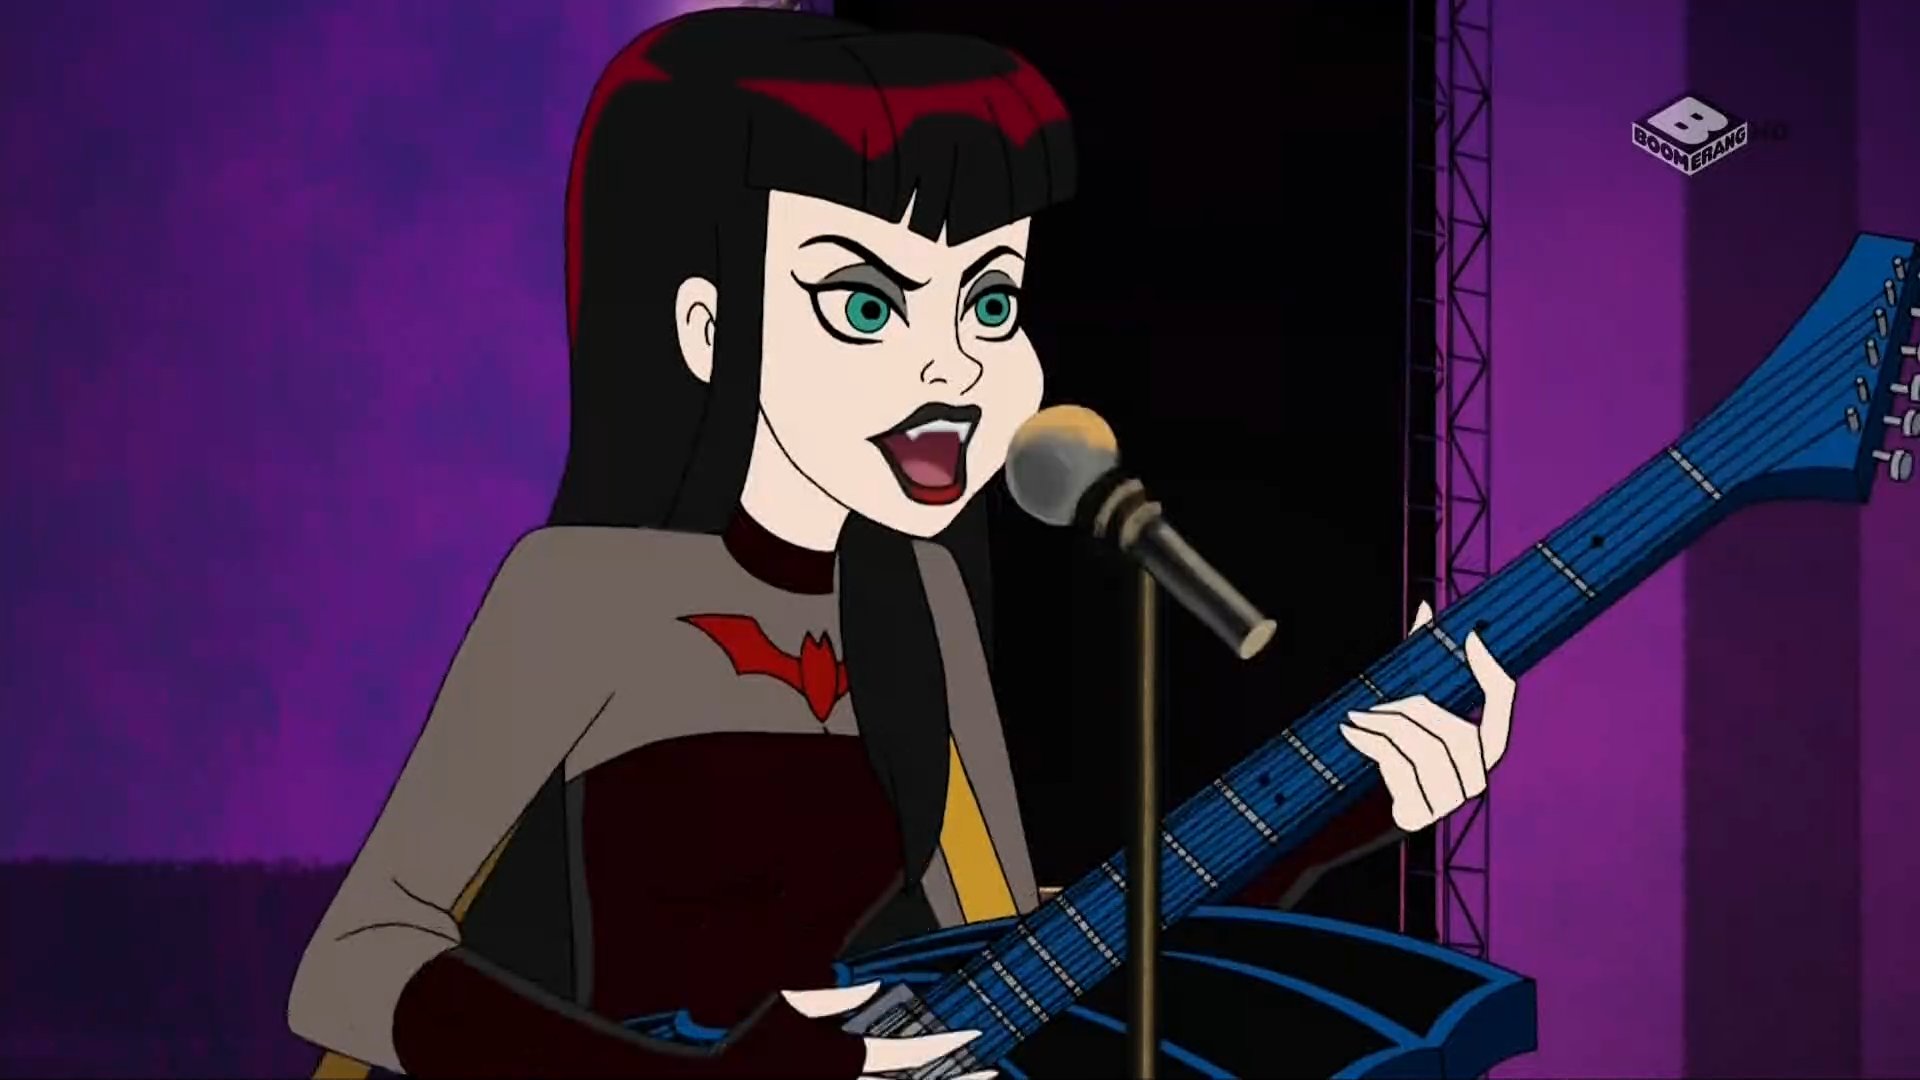 Reference Emporium on Twitter: "Screenshots of the Hex Girls (Thorn, and Luna) from Scooby-Doo and Guess Who? https://t.co/GYjIKZVsKN or https://t.co/DoMIjeBGjK https://t.co/vZ3F2pQl5t" / Twitter